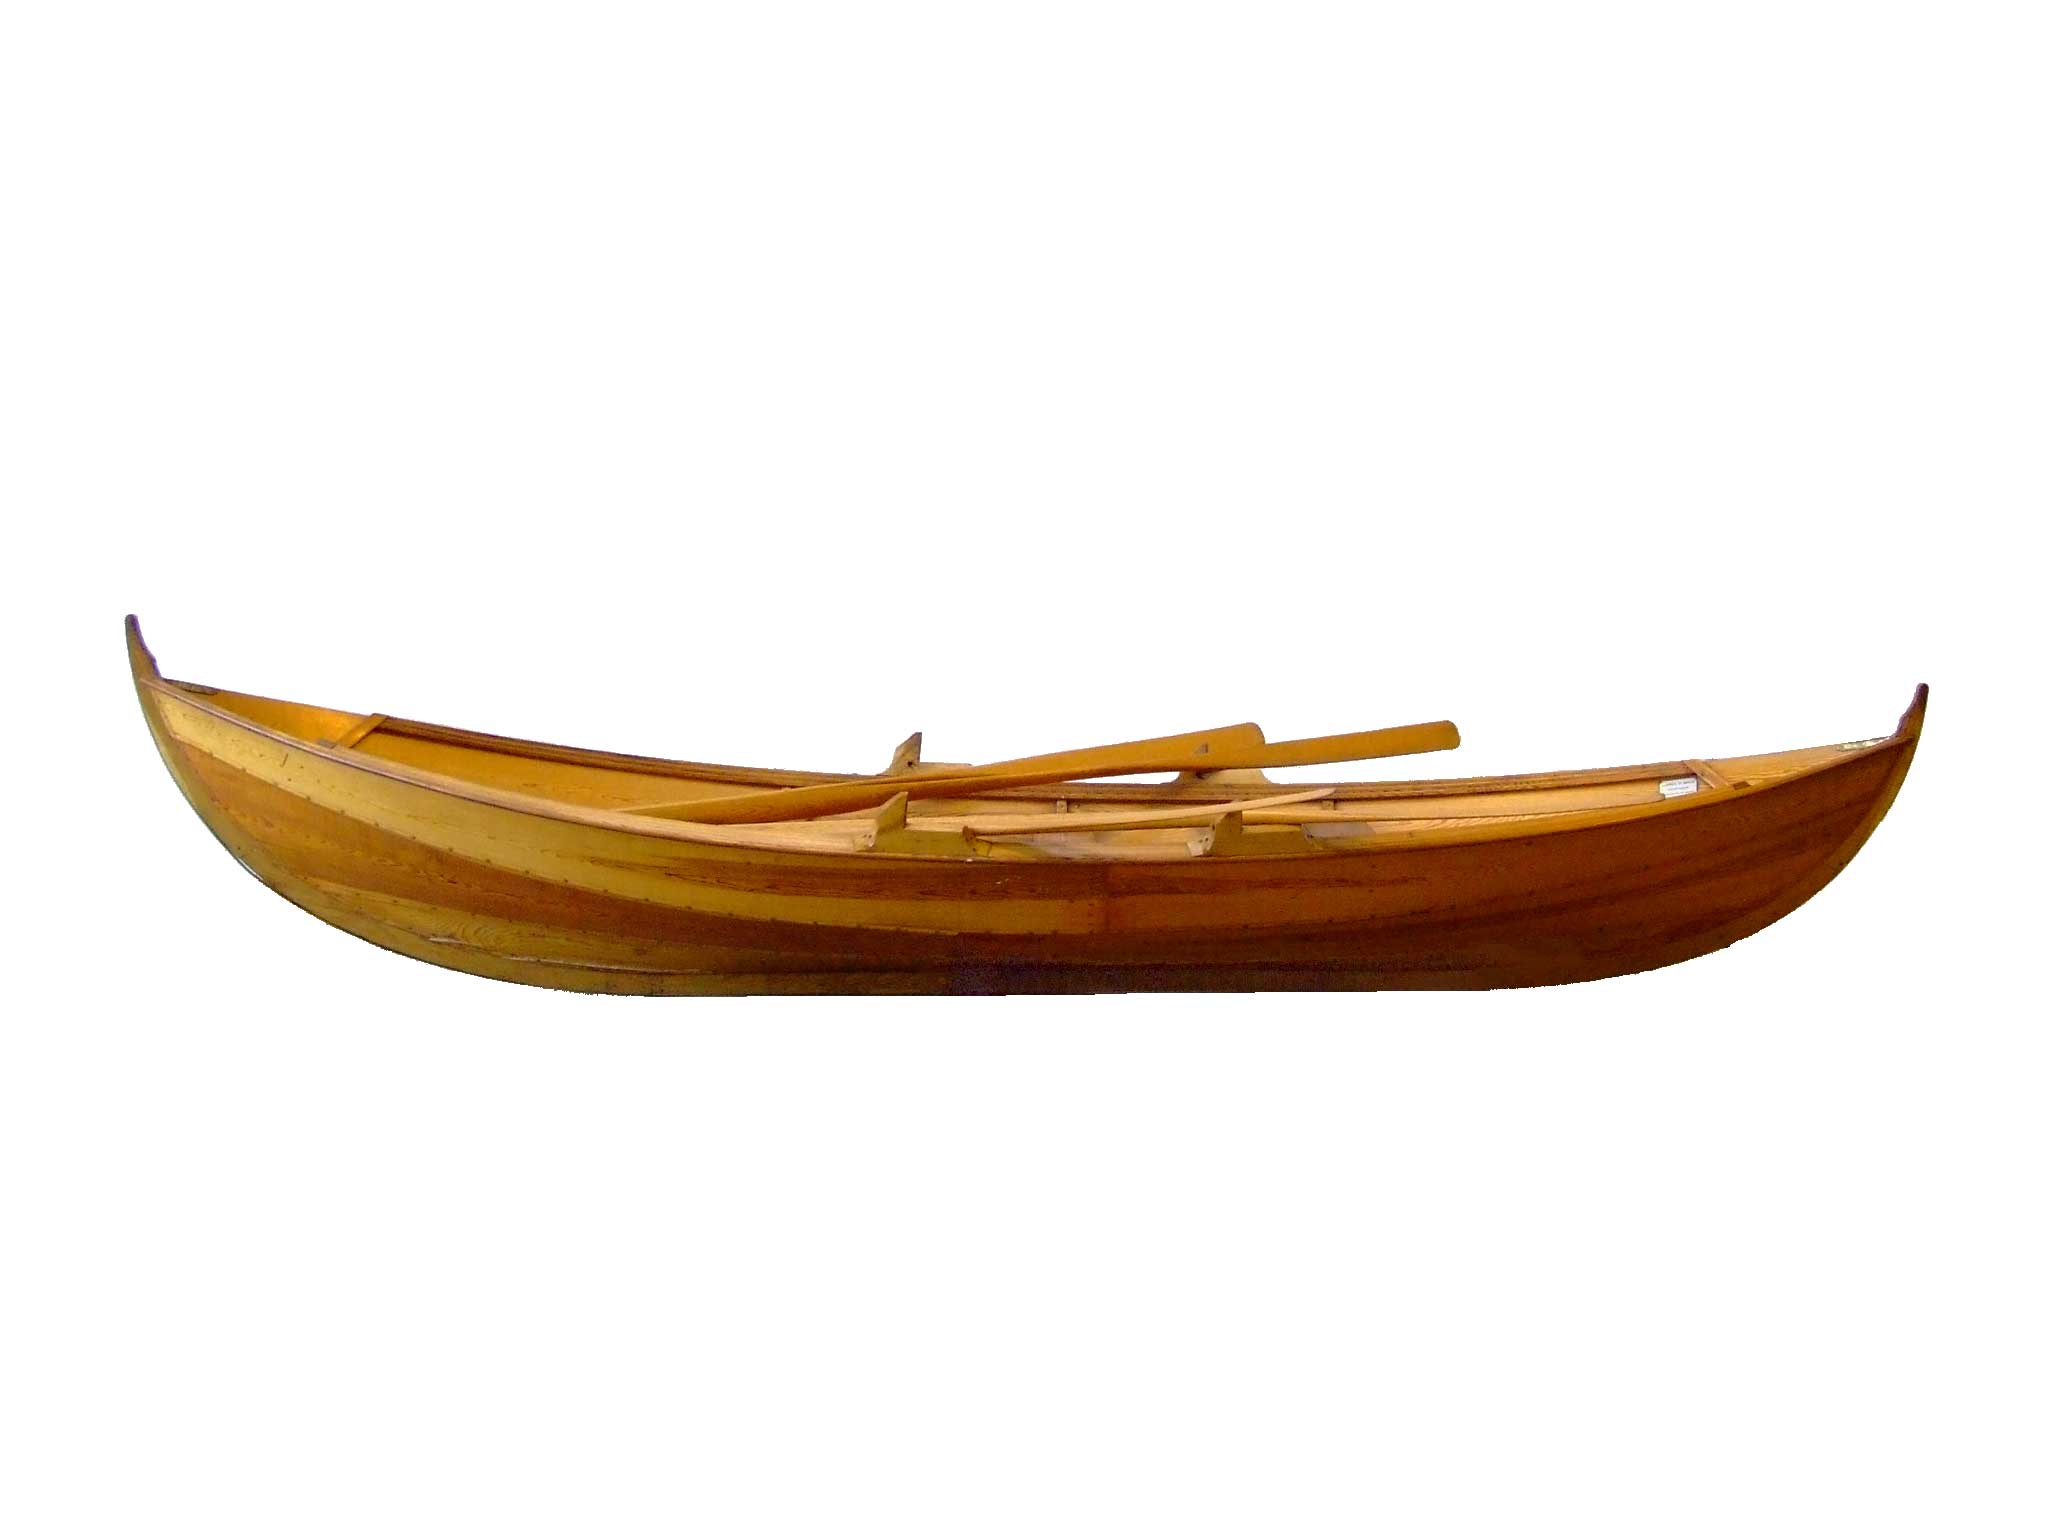 A scan of the Oselvar on a plain white background. A simple wooden boat, with graceful lines, descended from an expanded and extended dugout, and built with overlapping planks.